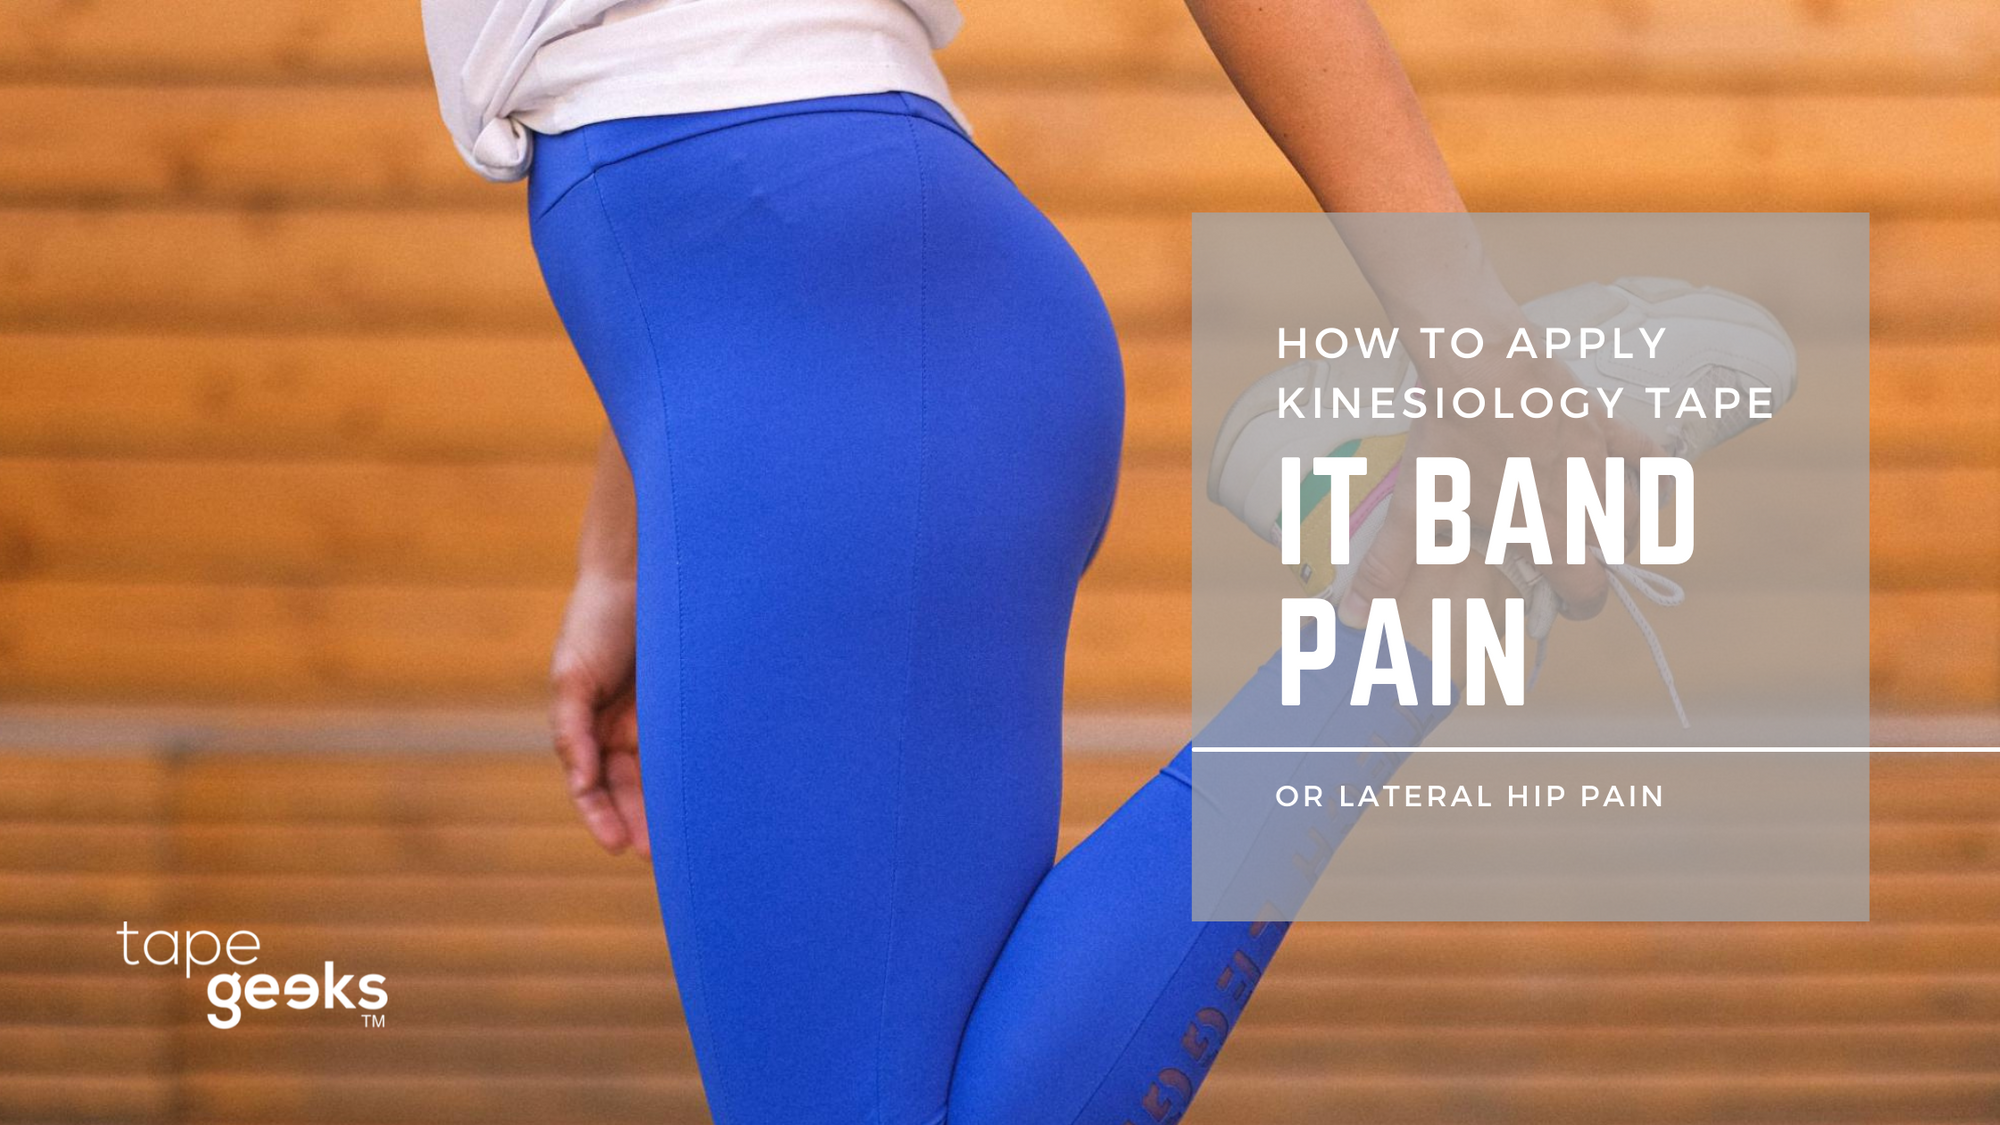 HOW TO APPLY KINESIOLOGY TAPE FOR THE IT BAND OR LATERAL HIP